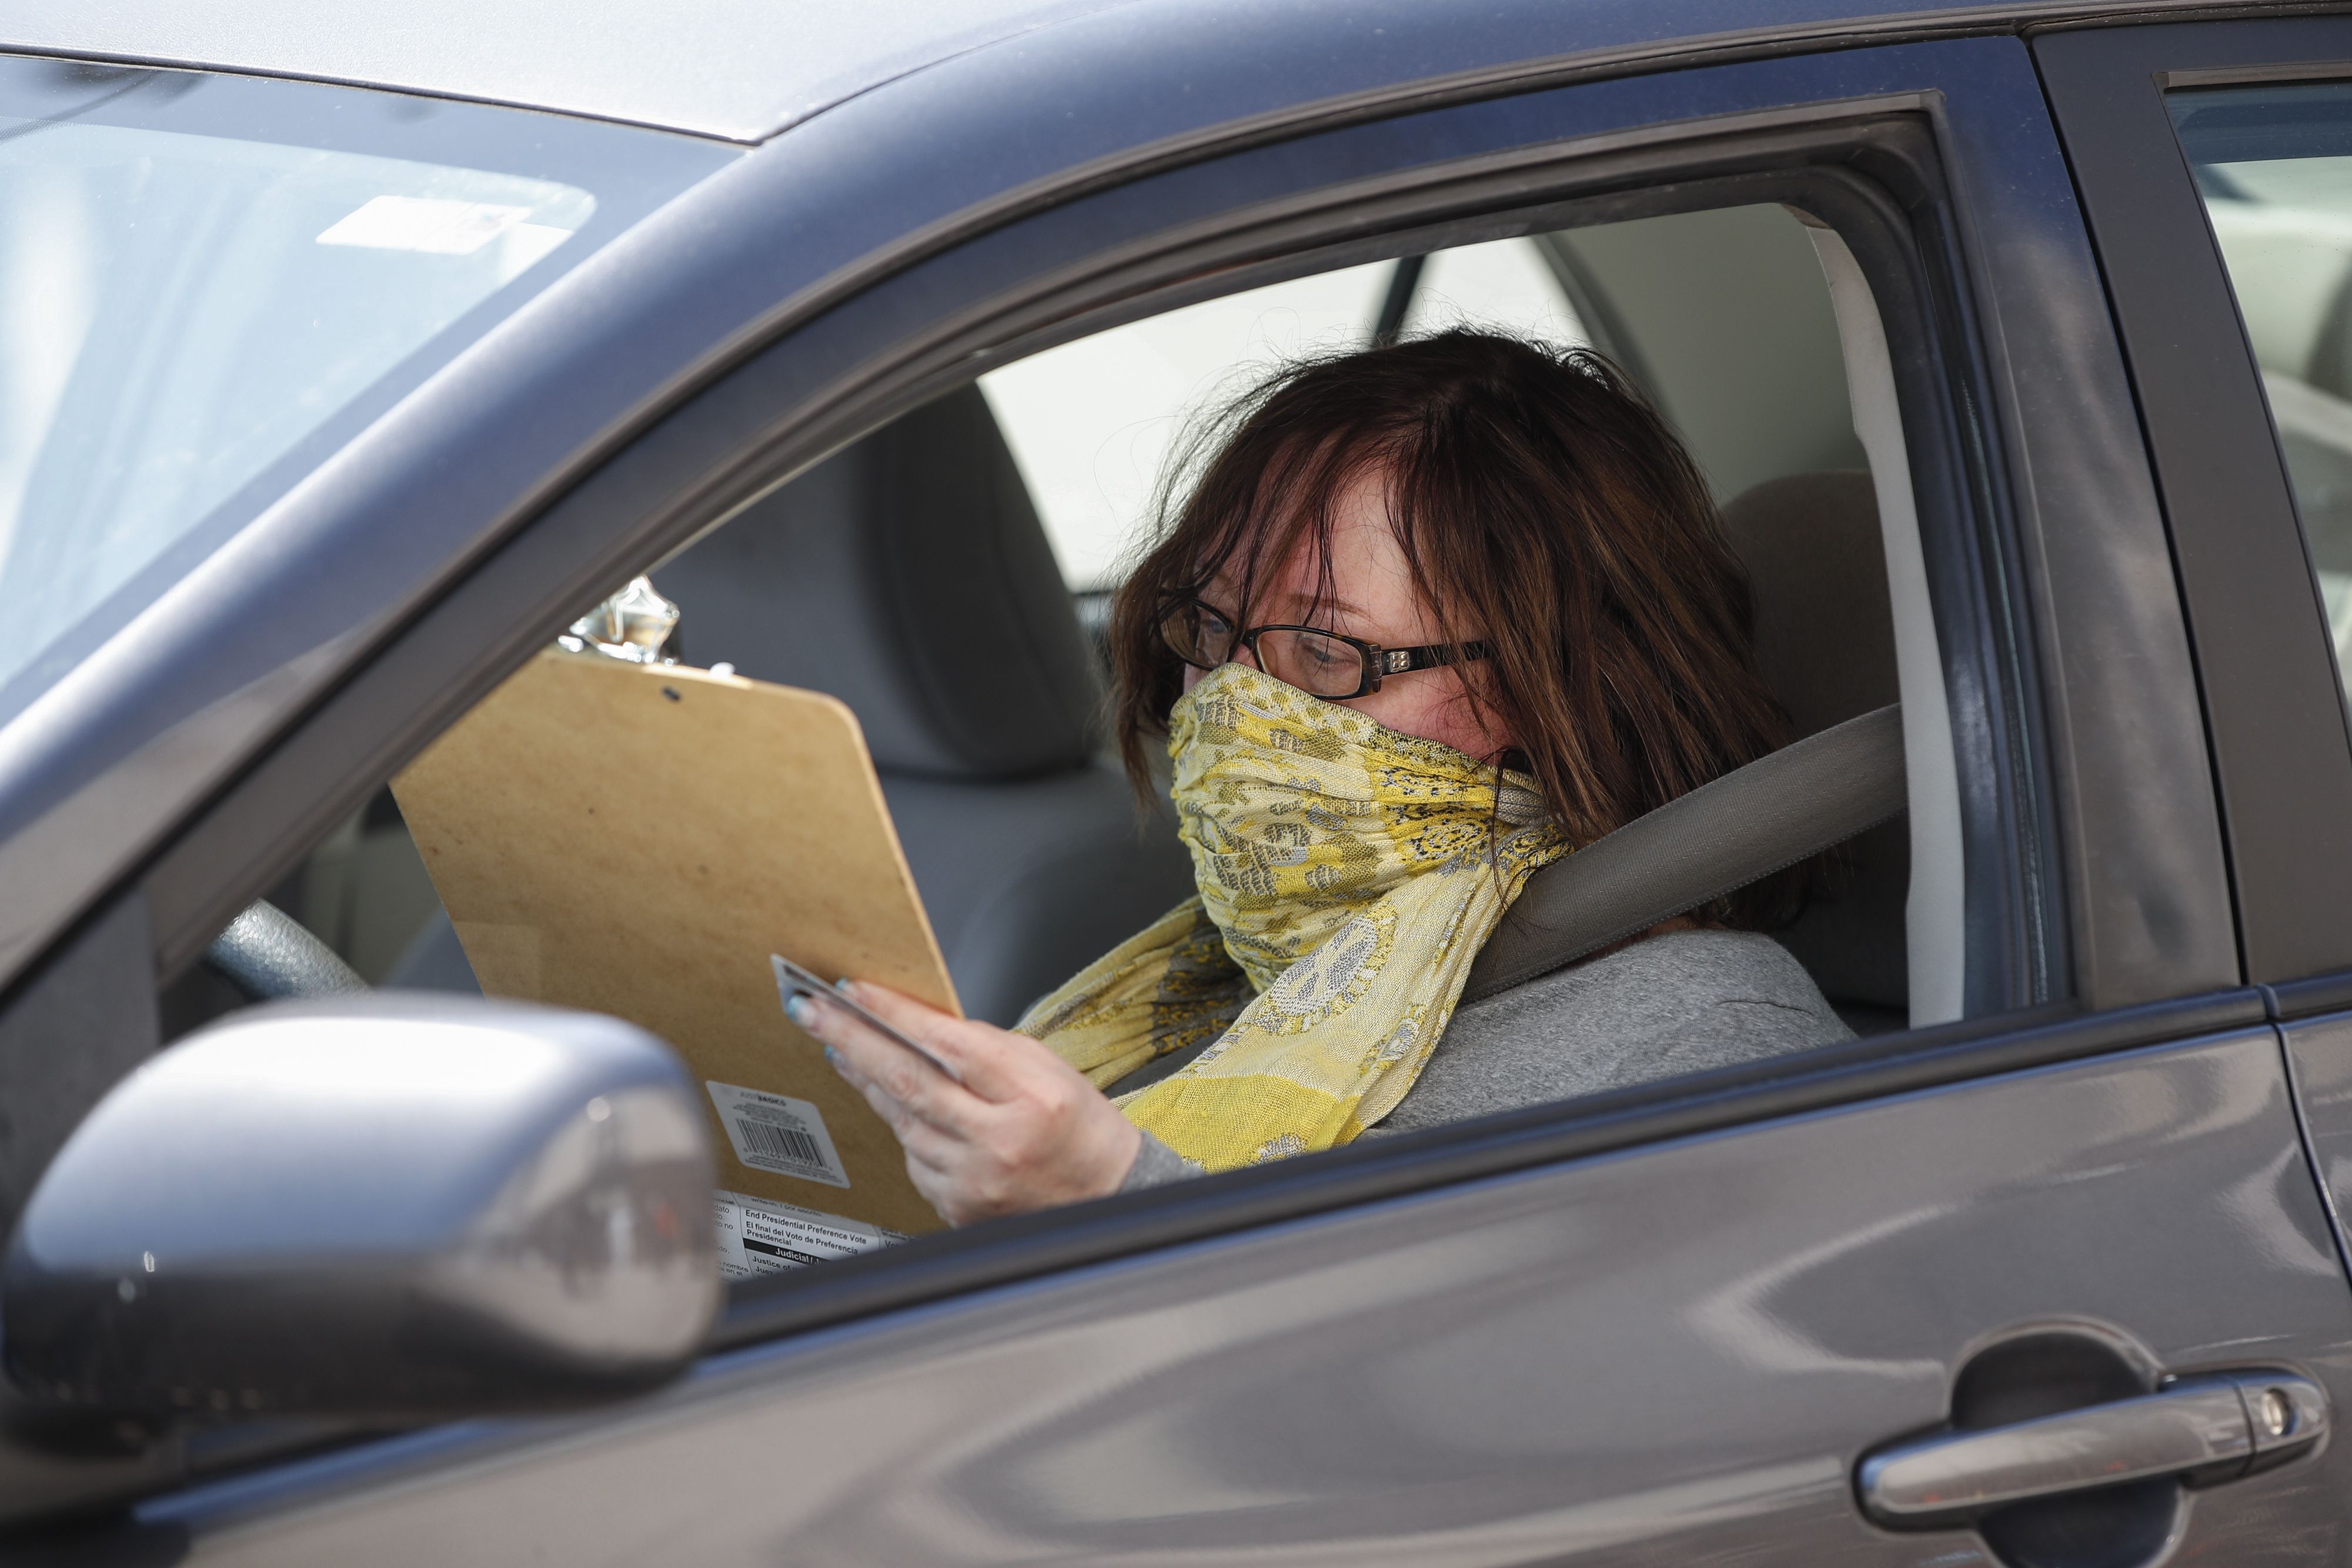 In this image, a woman sits in her car while wearing a bandana around her face and filling out a clipboard